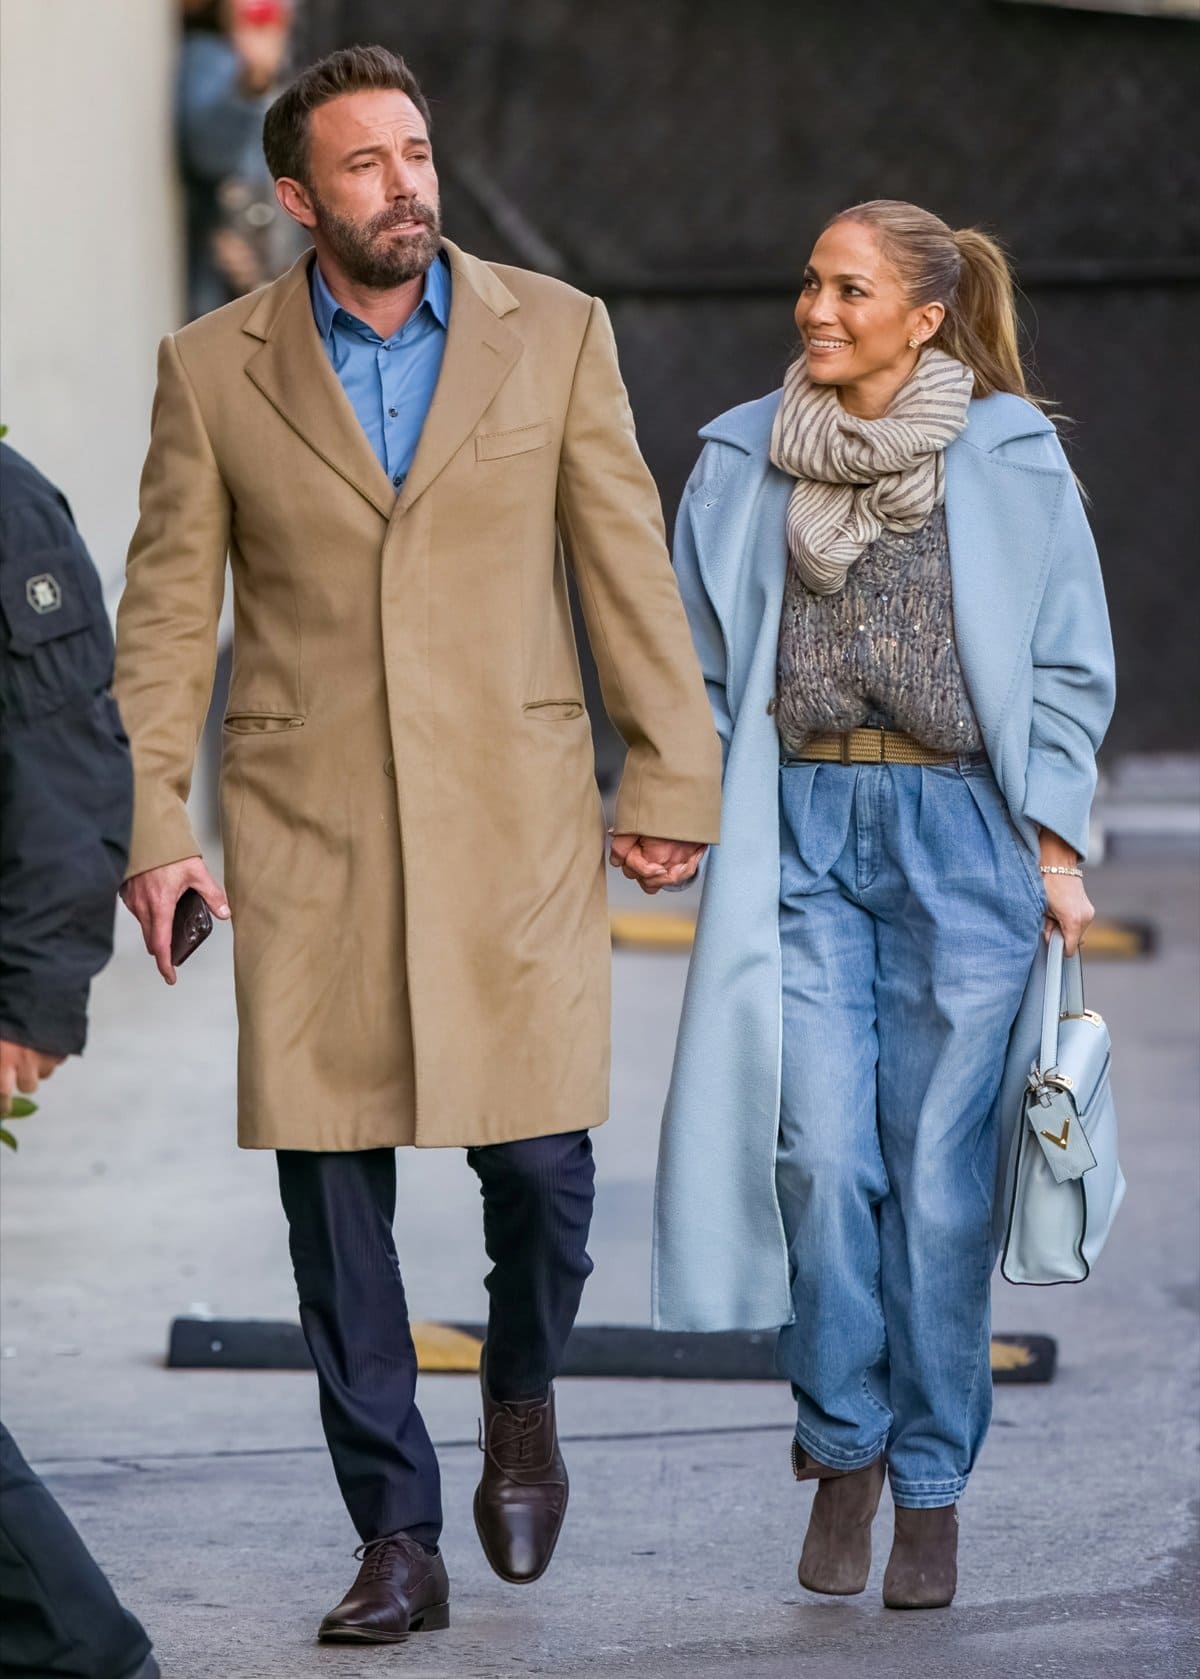 Jennifer Lopez and Ben Affleck rekindled their romance in 2021 after almost twenty years of their first relationship